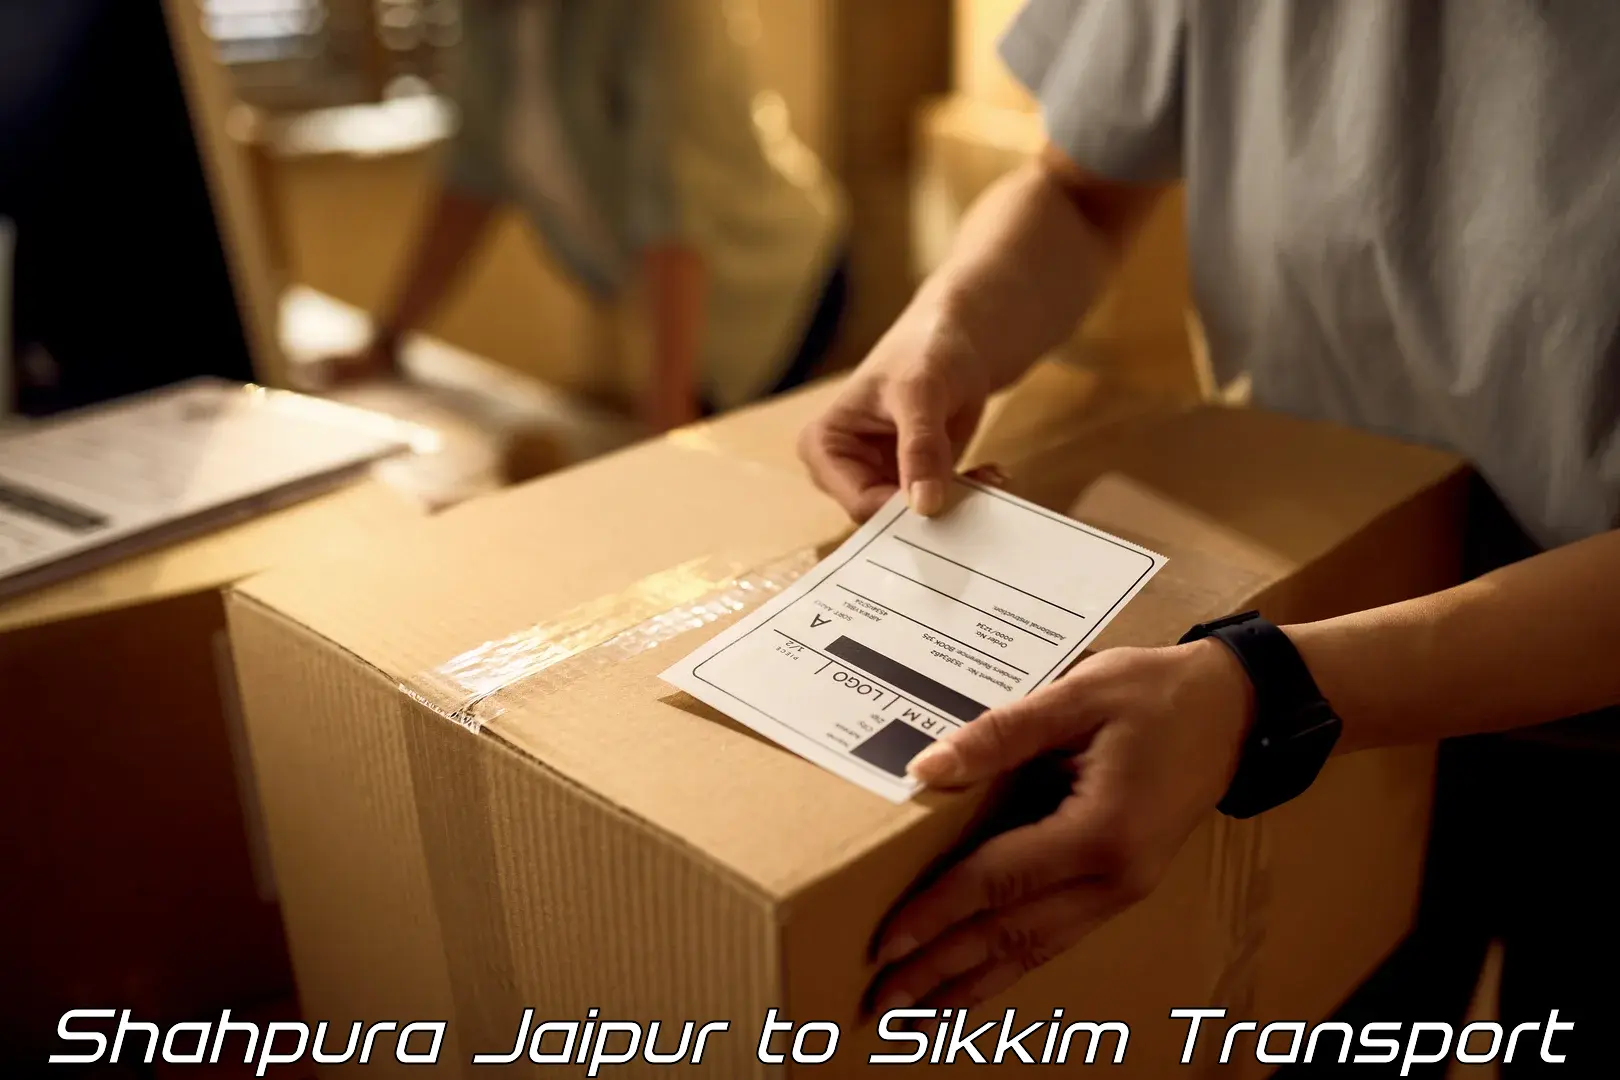 Transport bike from one state to another Shahpura Jaipur to Sikkim